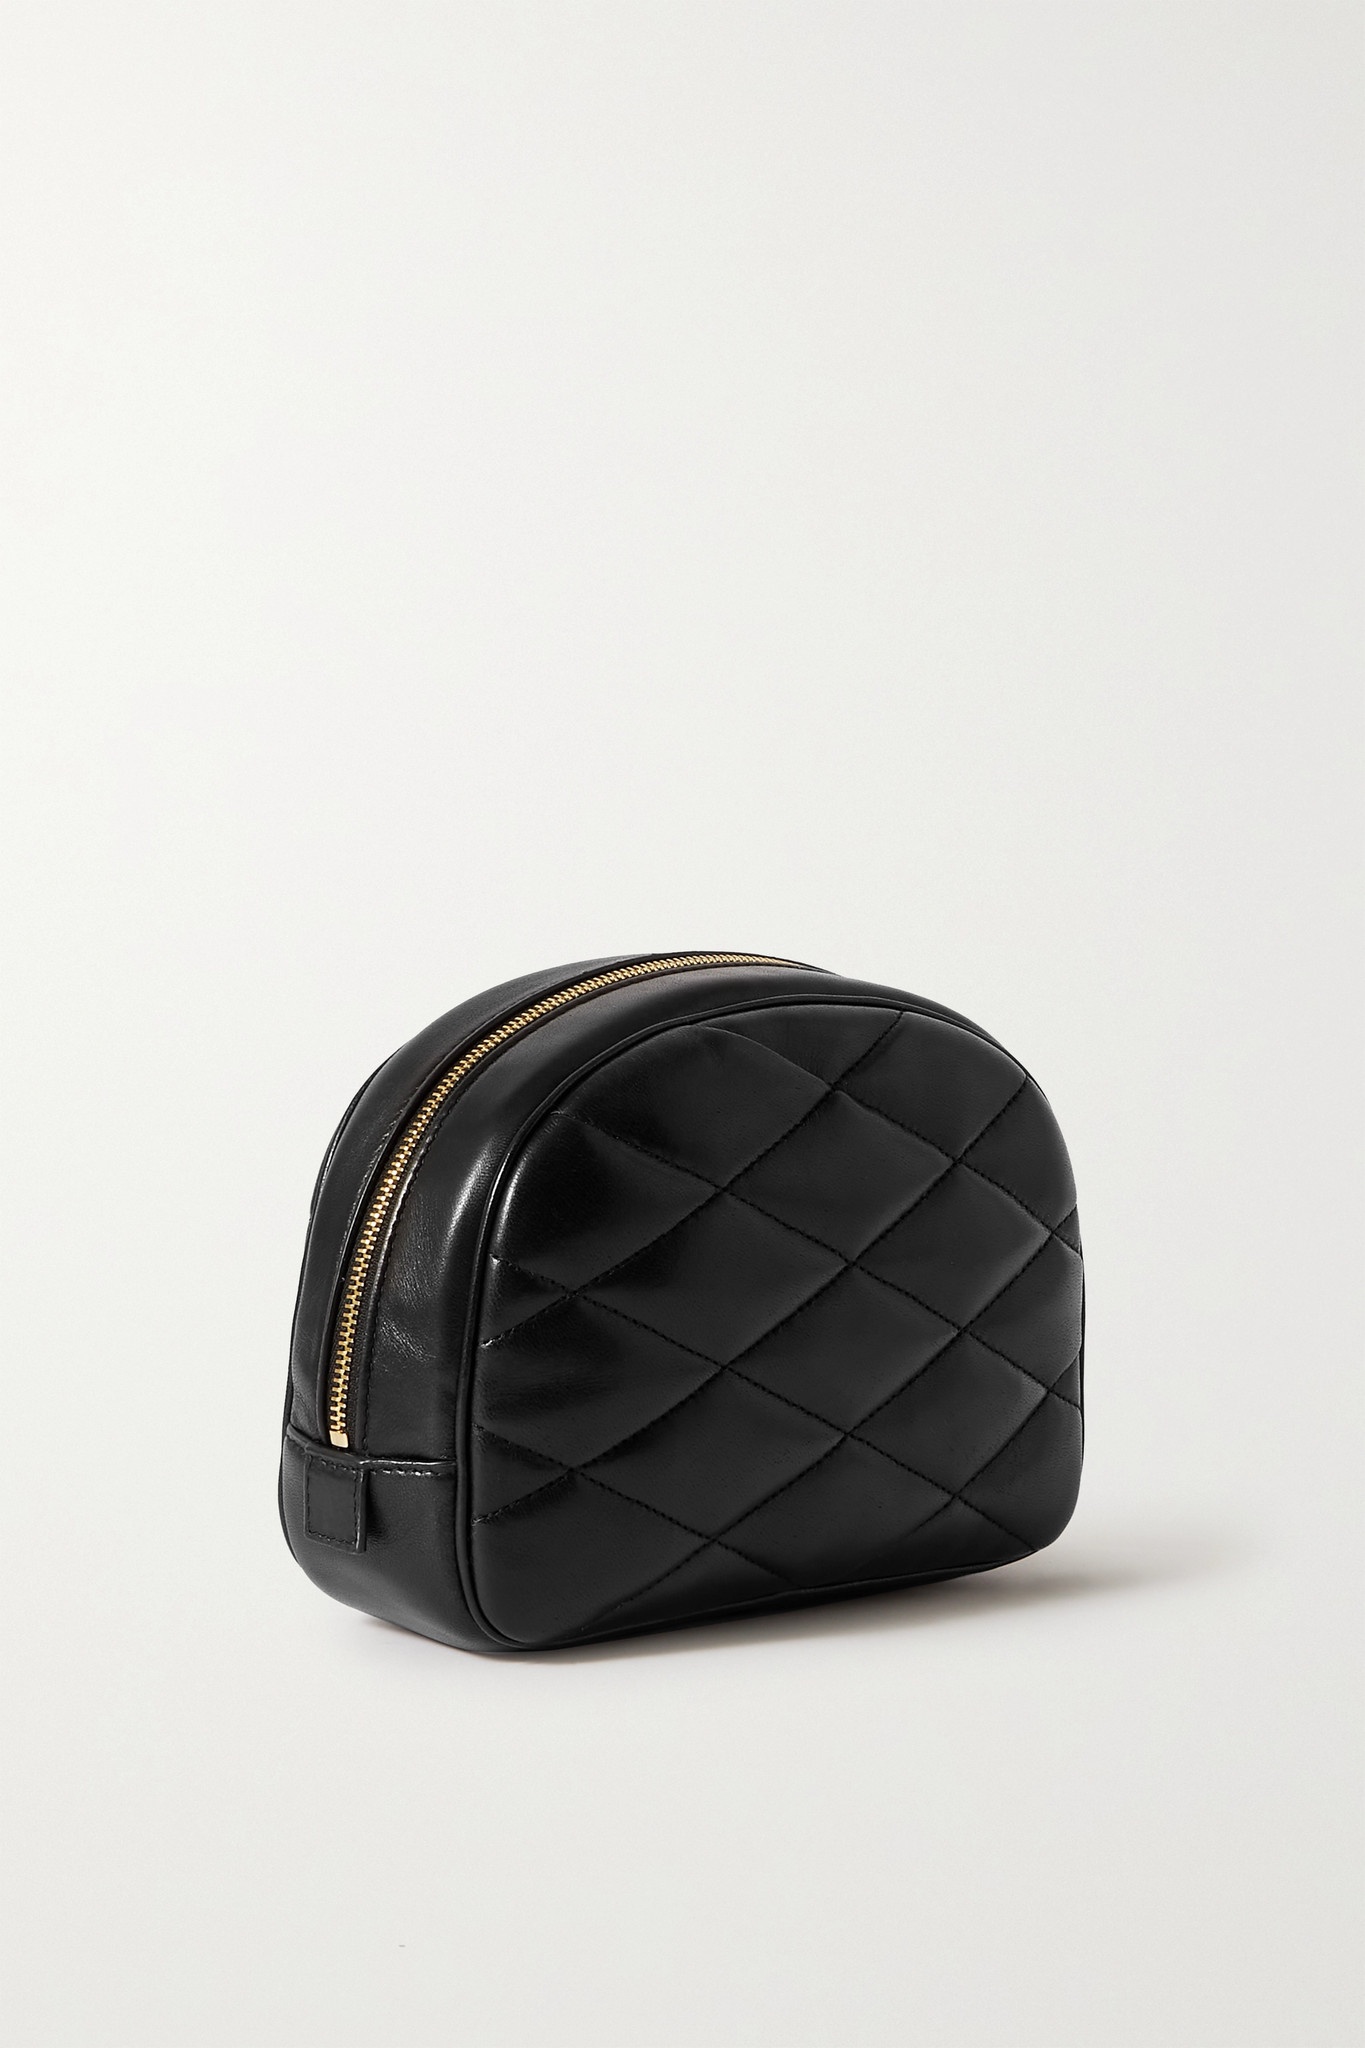 Lolita quilted leather cosmetics case - 2